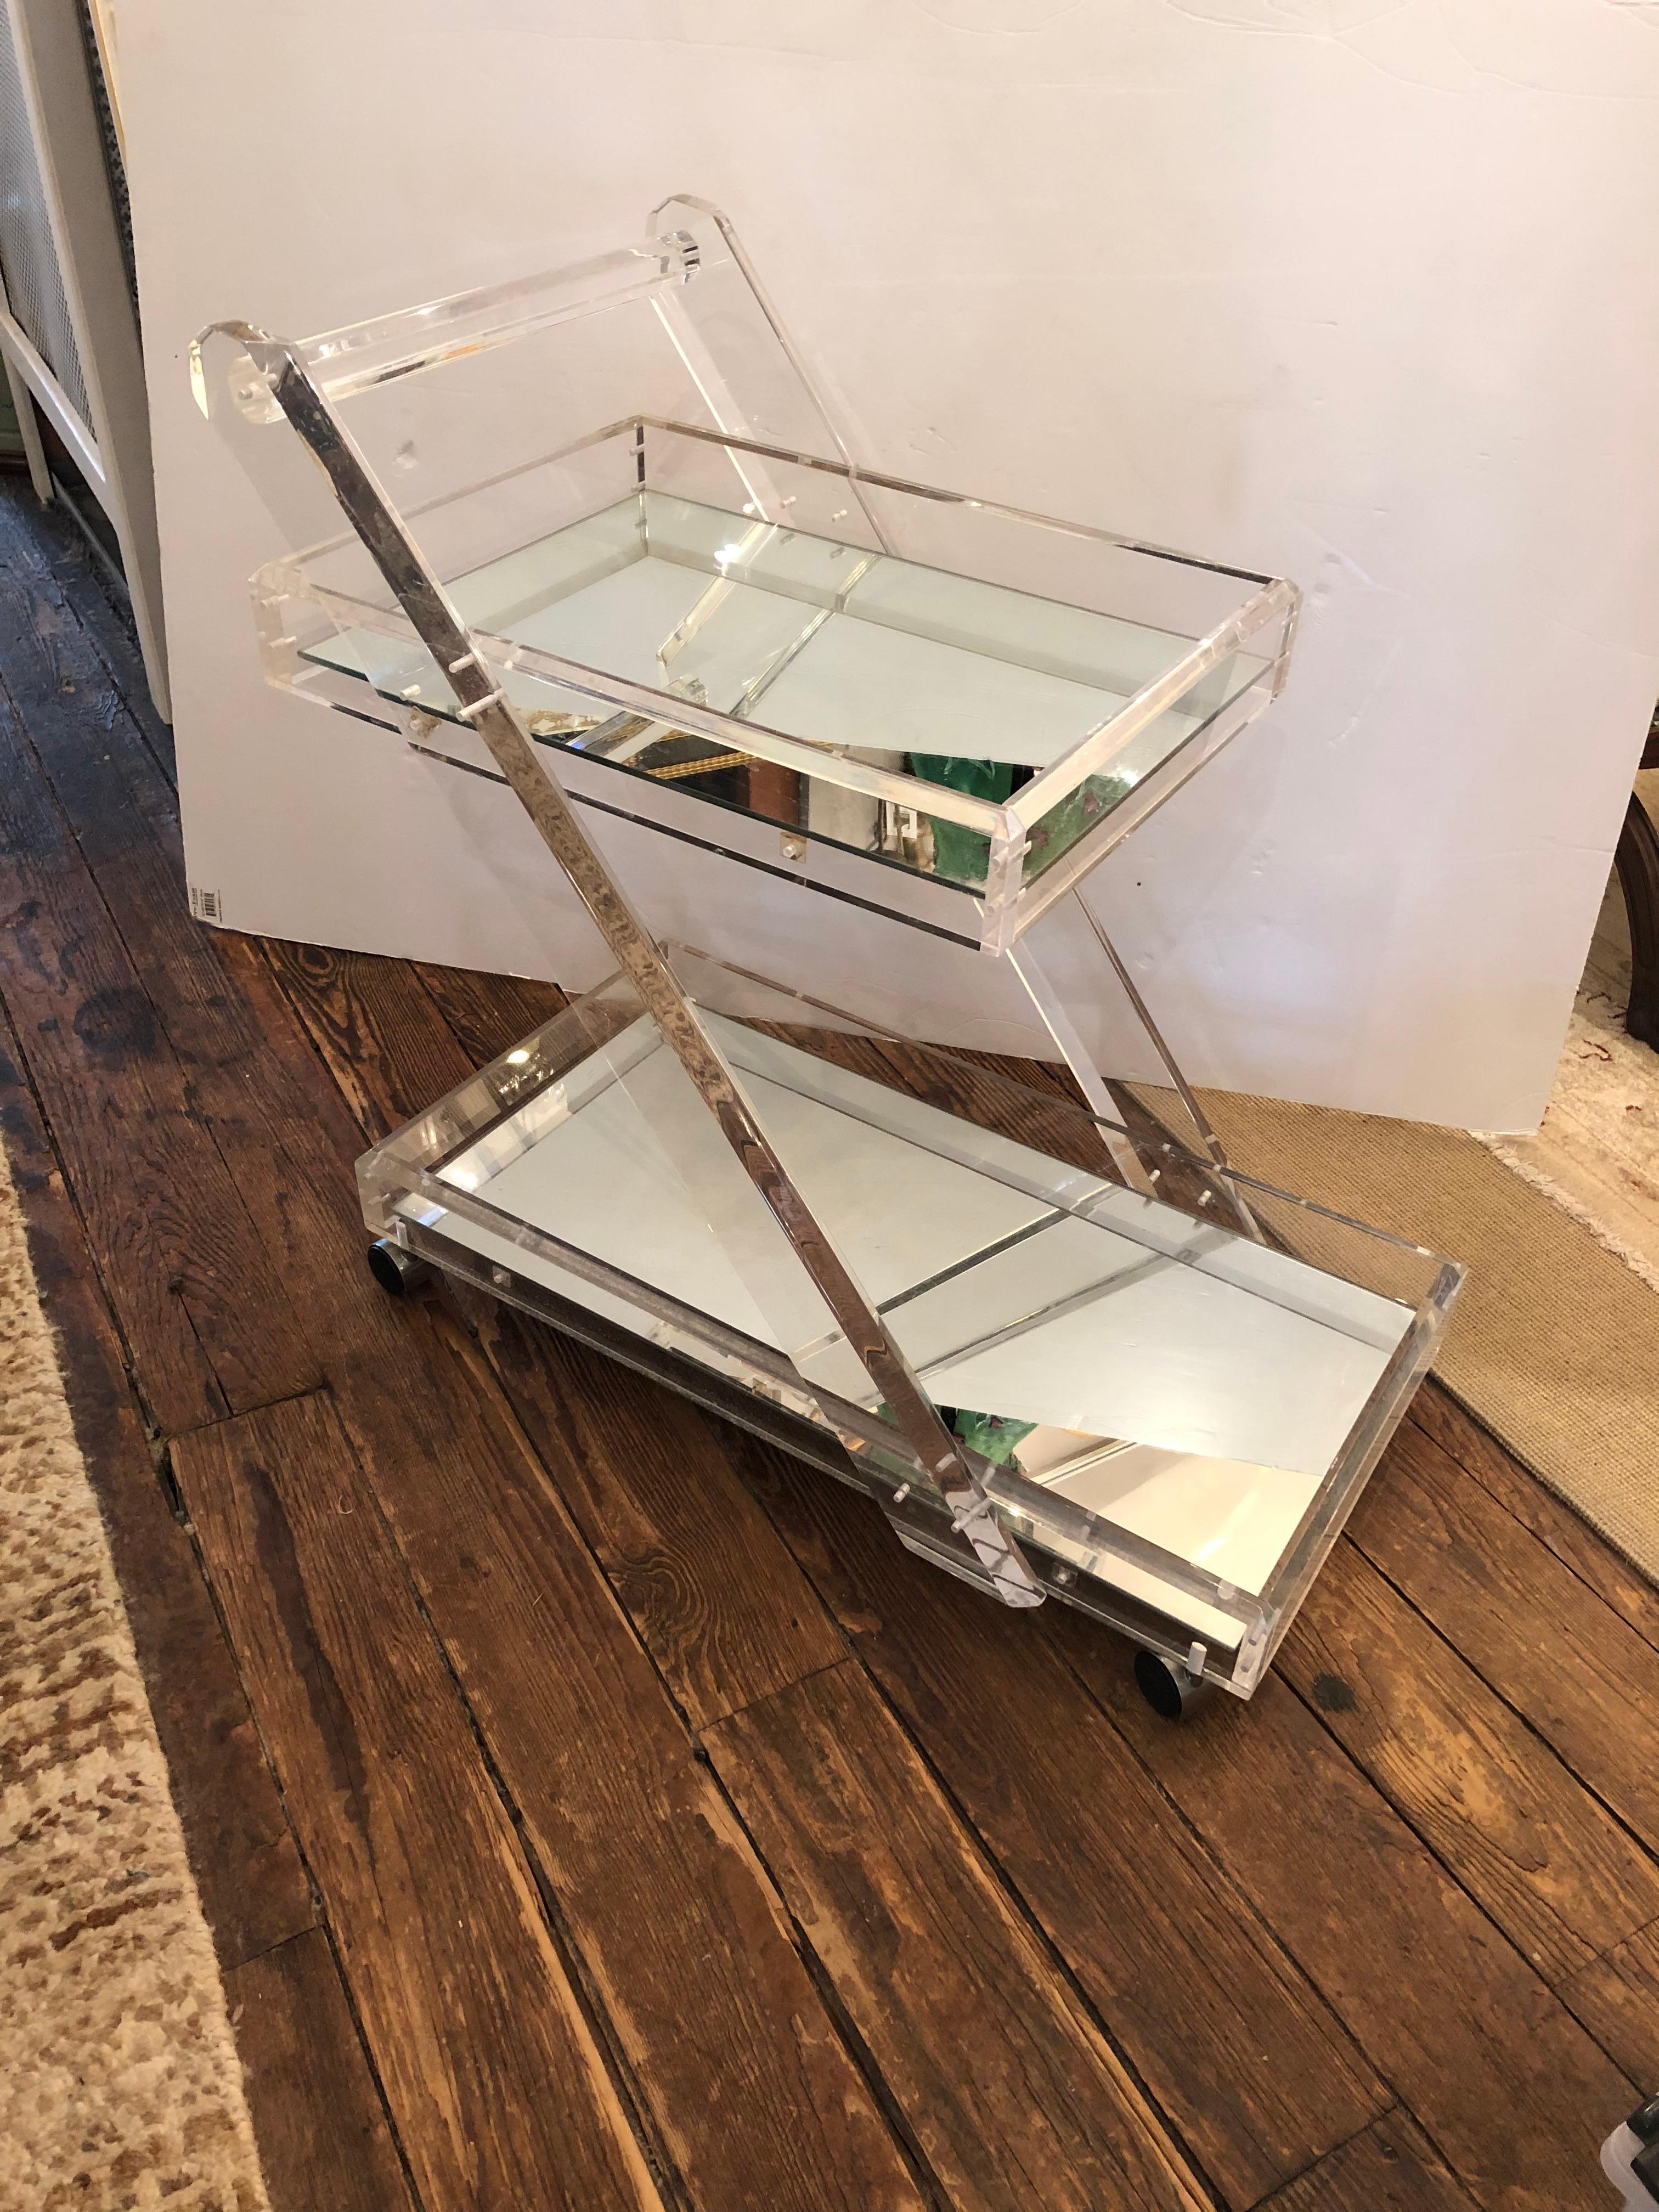 Glitzy Mid-Century Modern two tier lucite bar cart having mirrored surfaces and easily gliding casters.
Measure: Top shelf 24